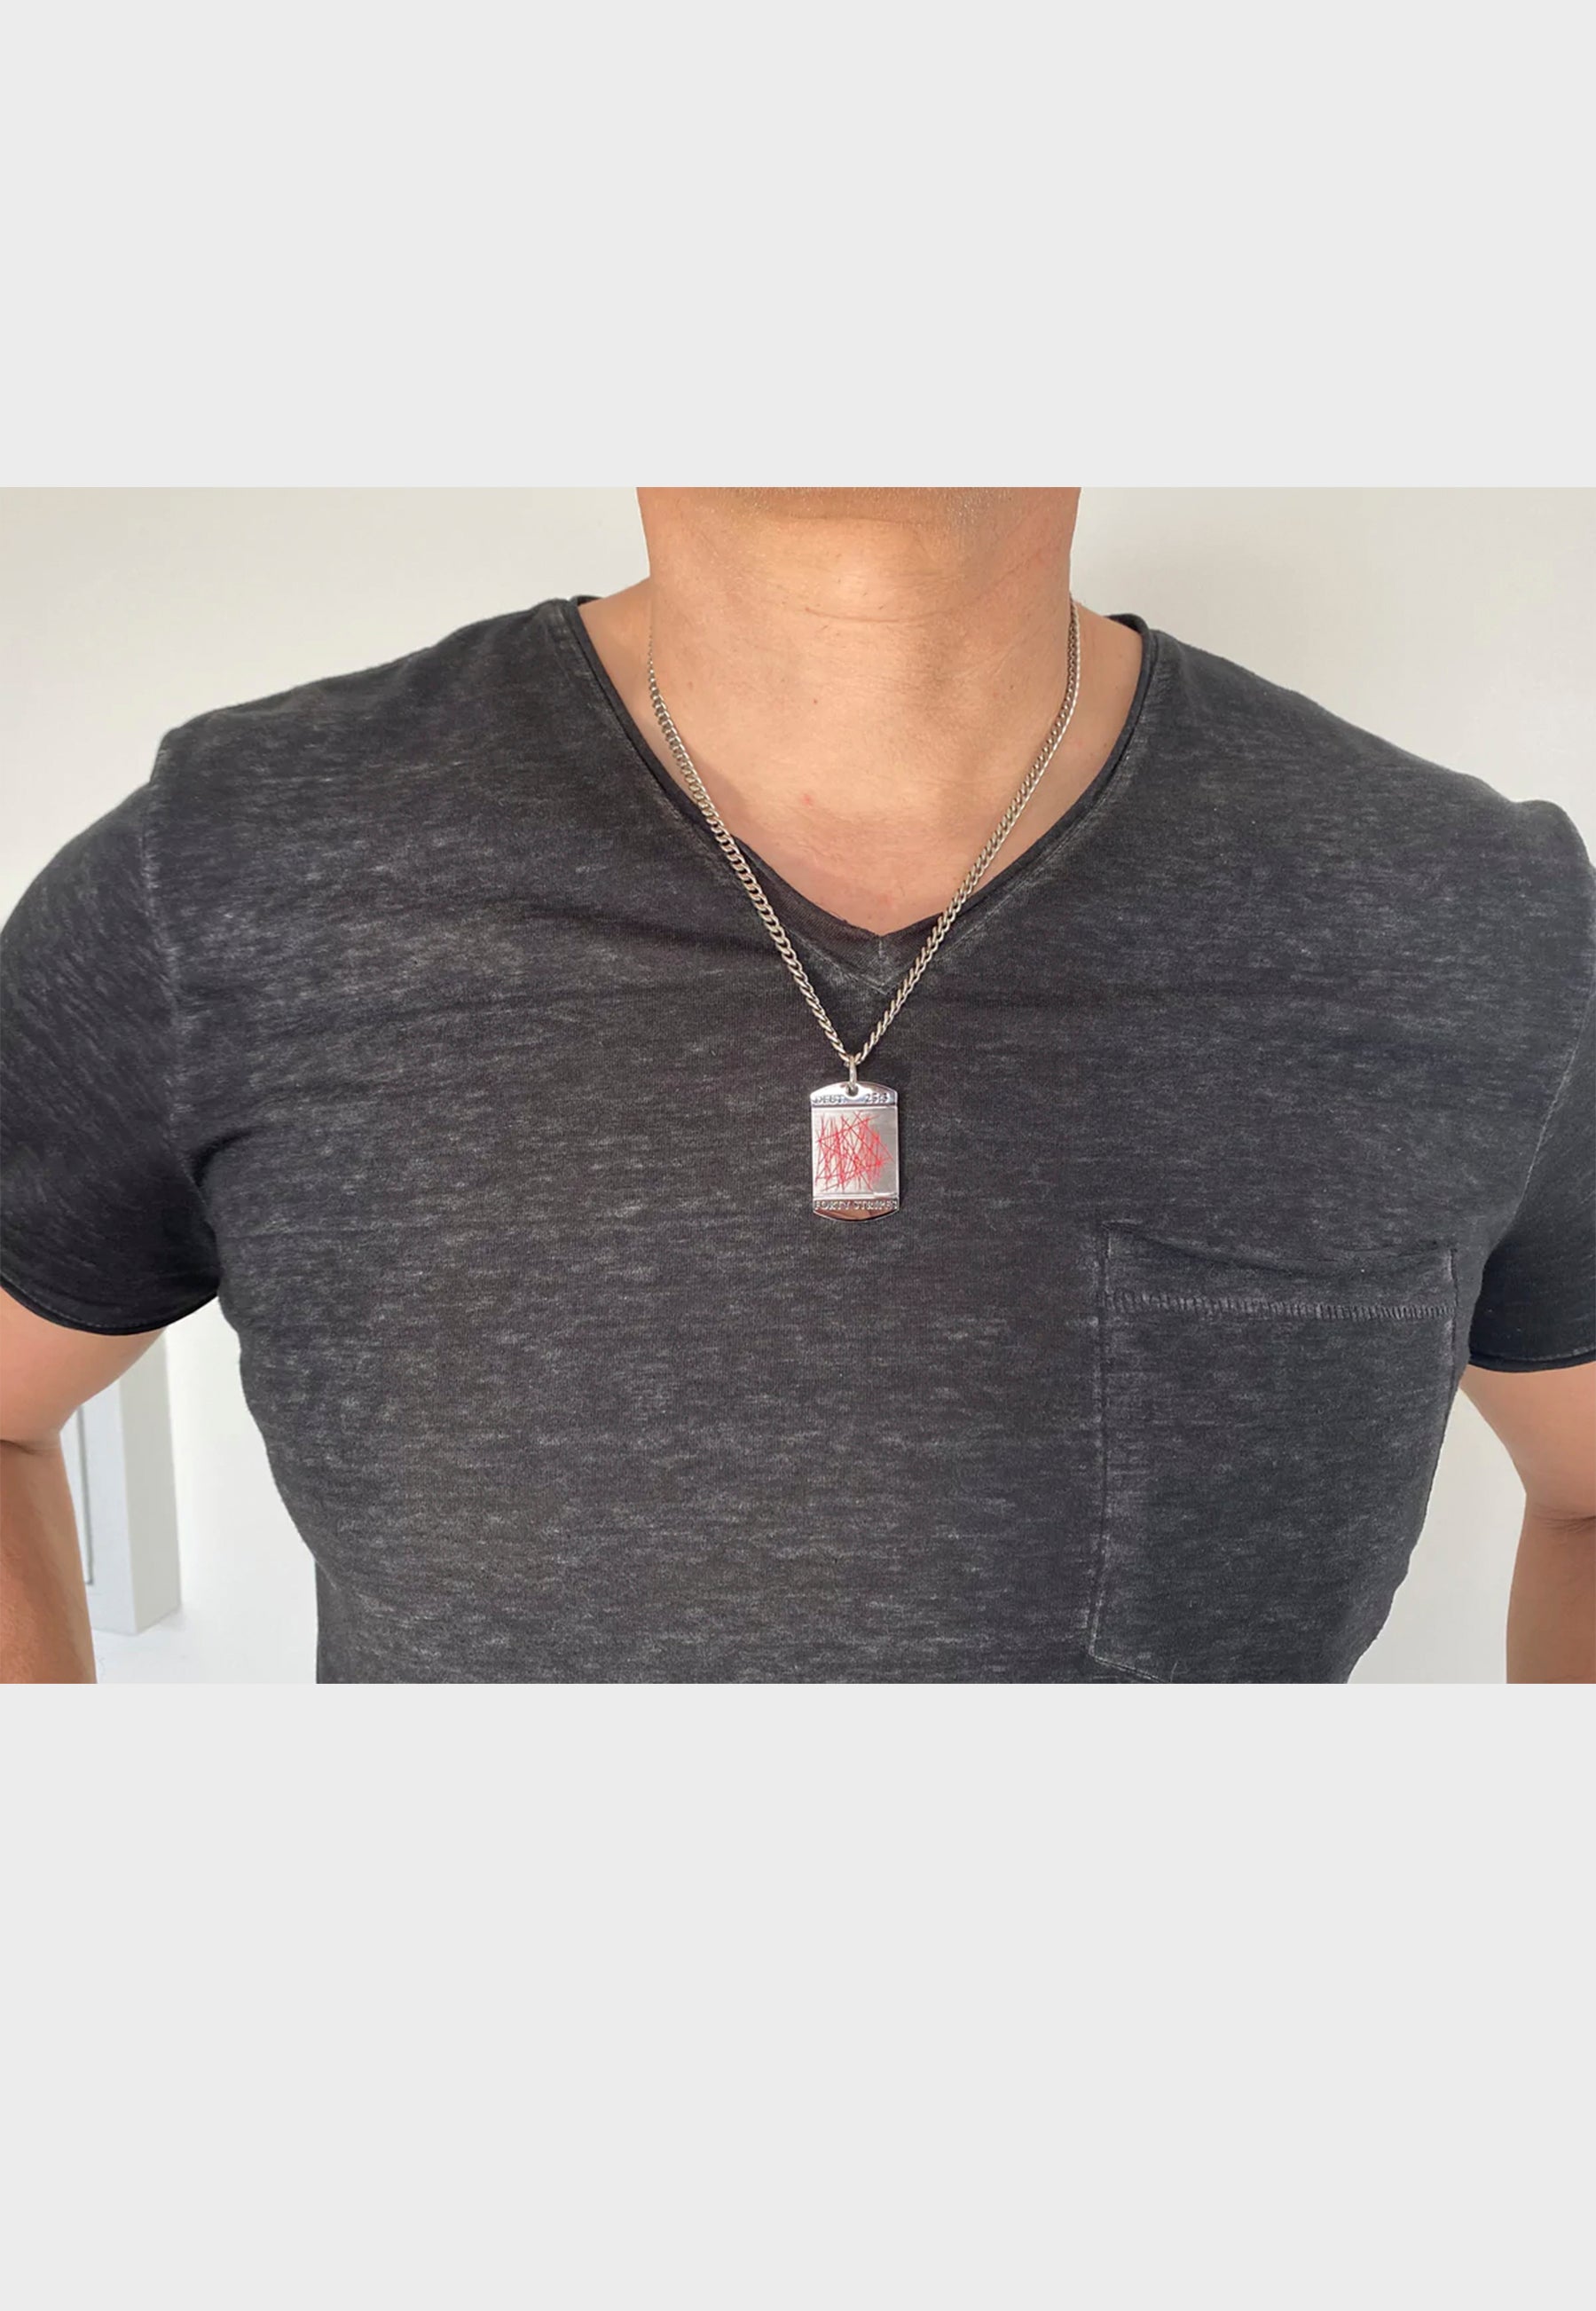 Man wearing Christian dogtag necklace